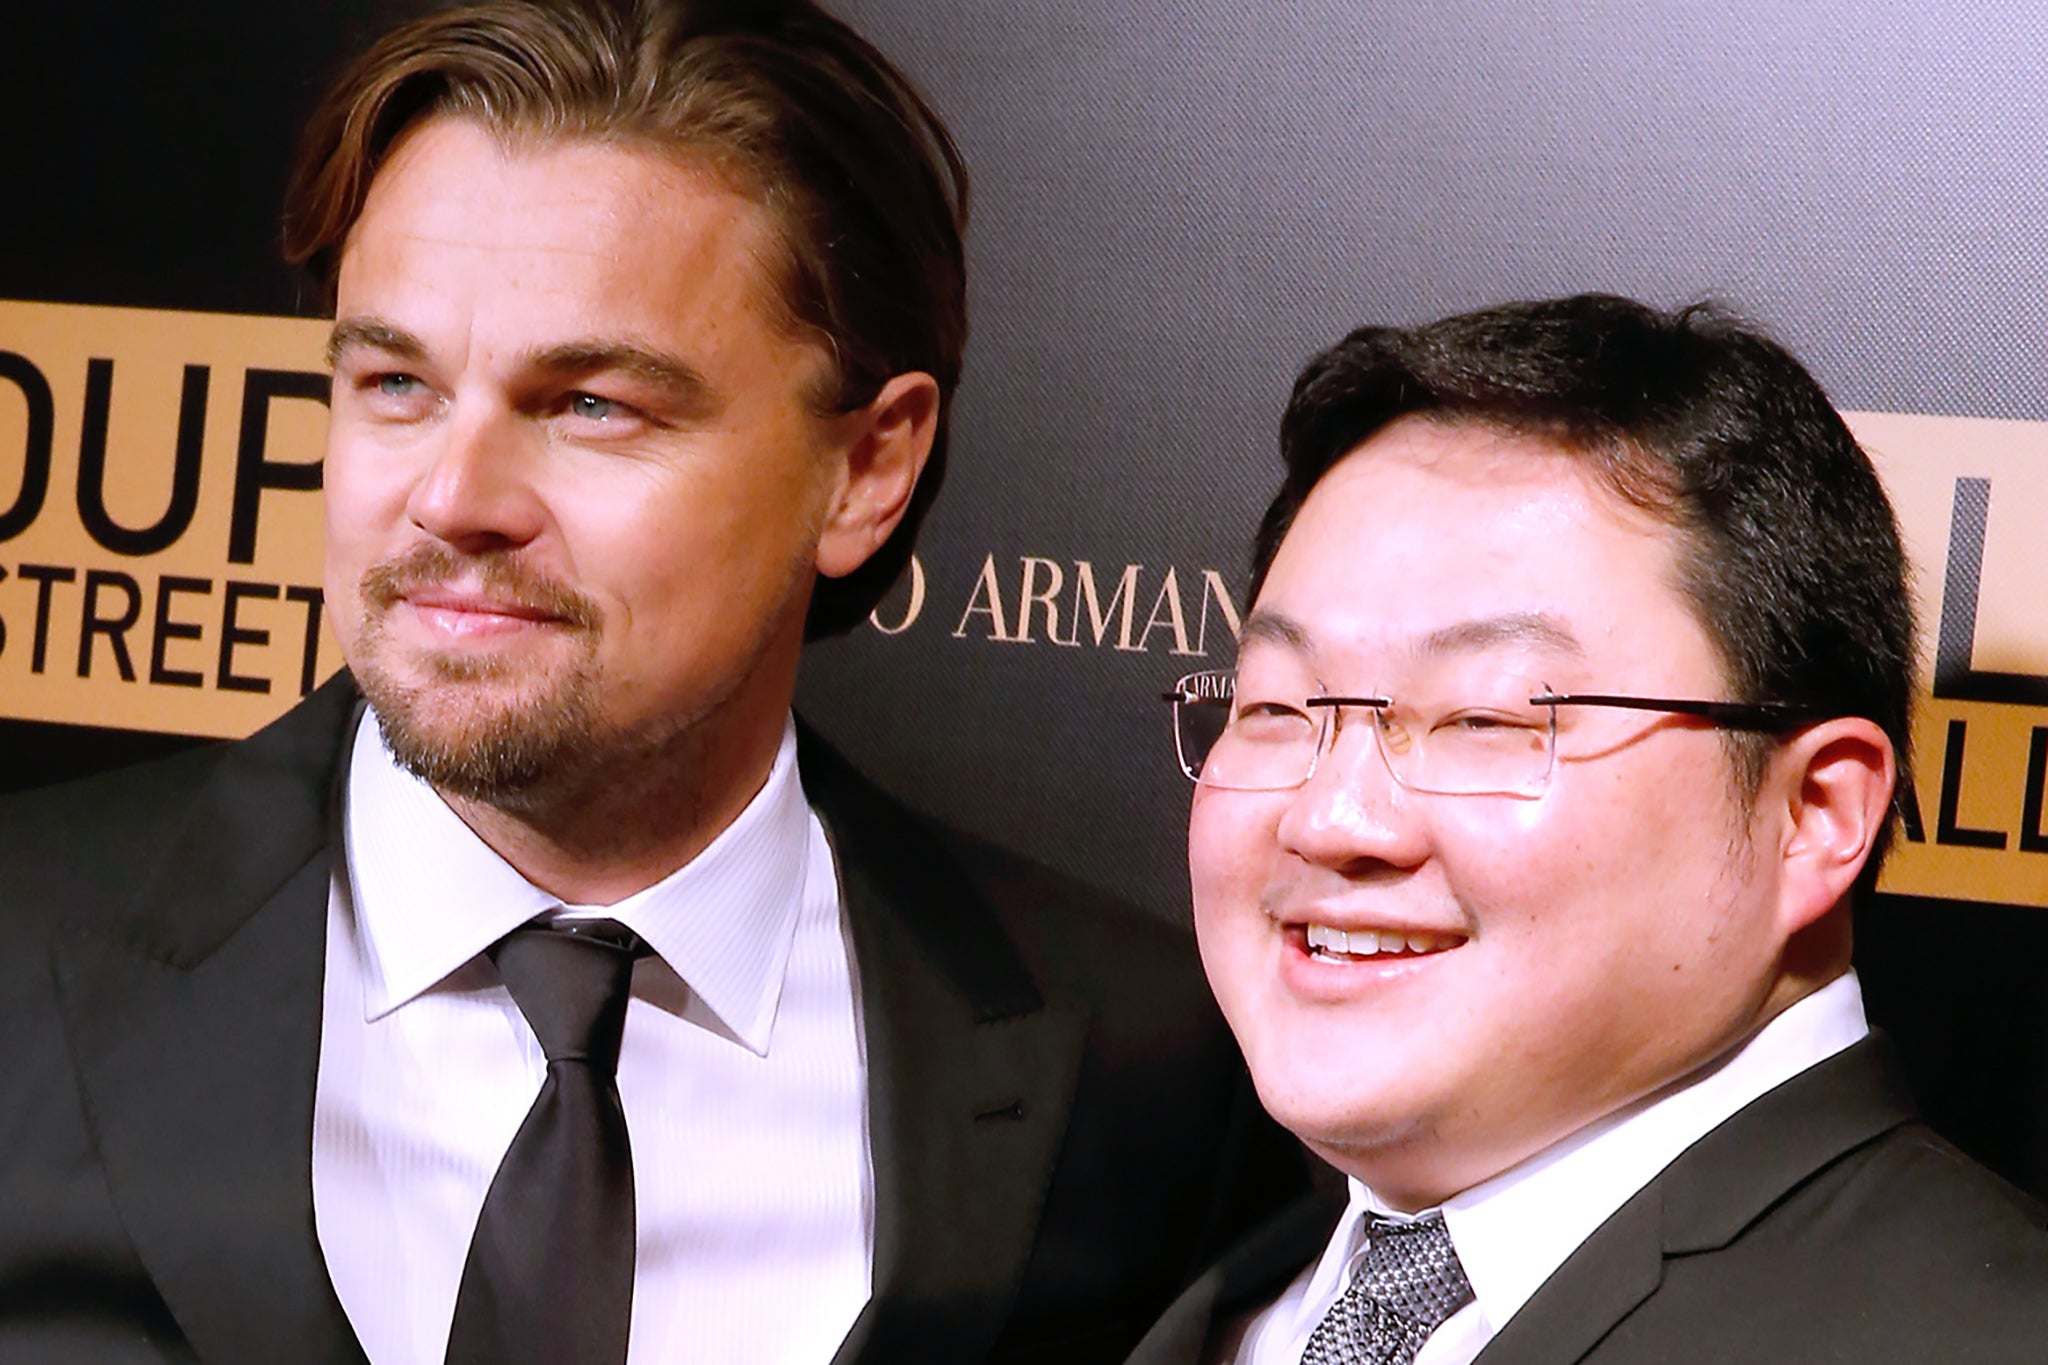 International man of mystery: Jho Low poses with Leonardo DiCaprio at the French premiere of ‘The Wolf of Wall Street’ in 2013